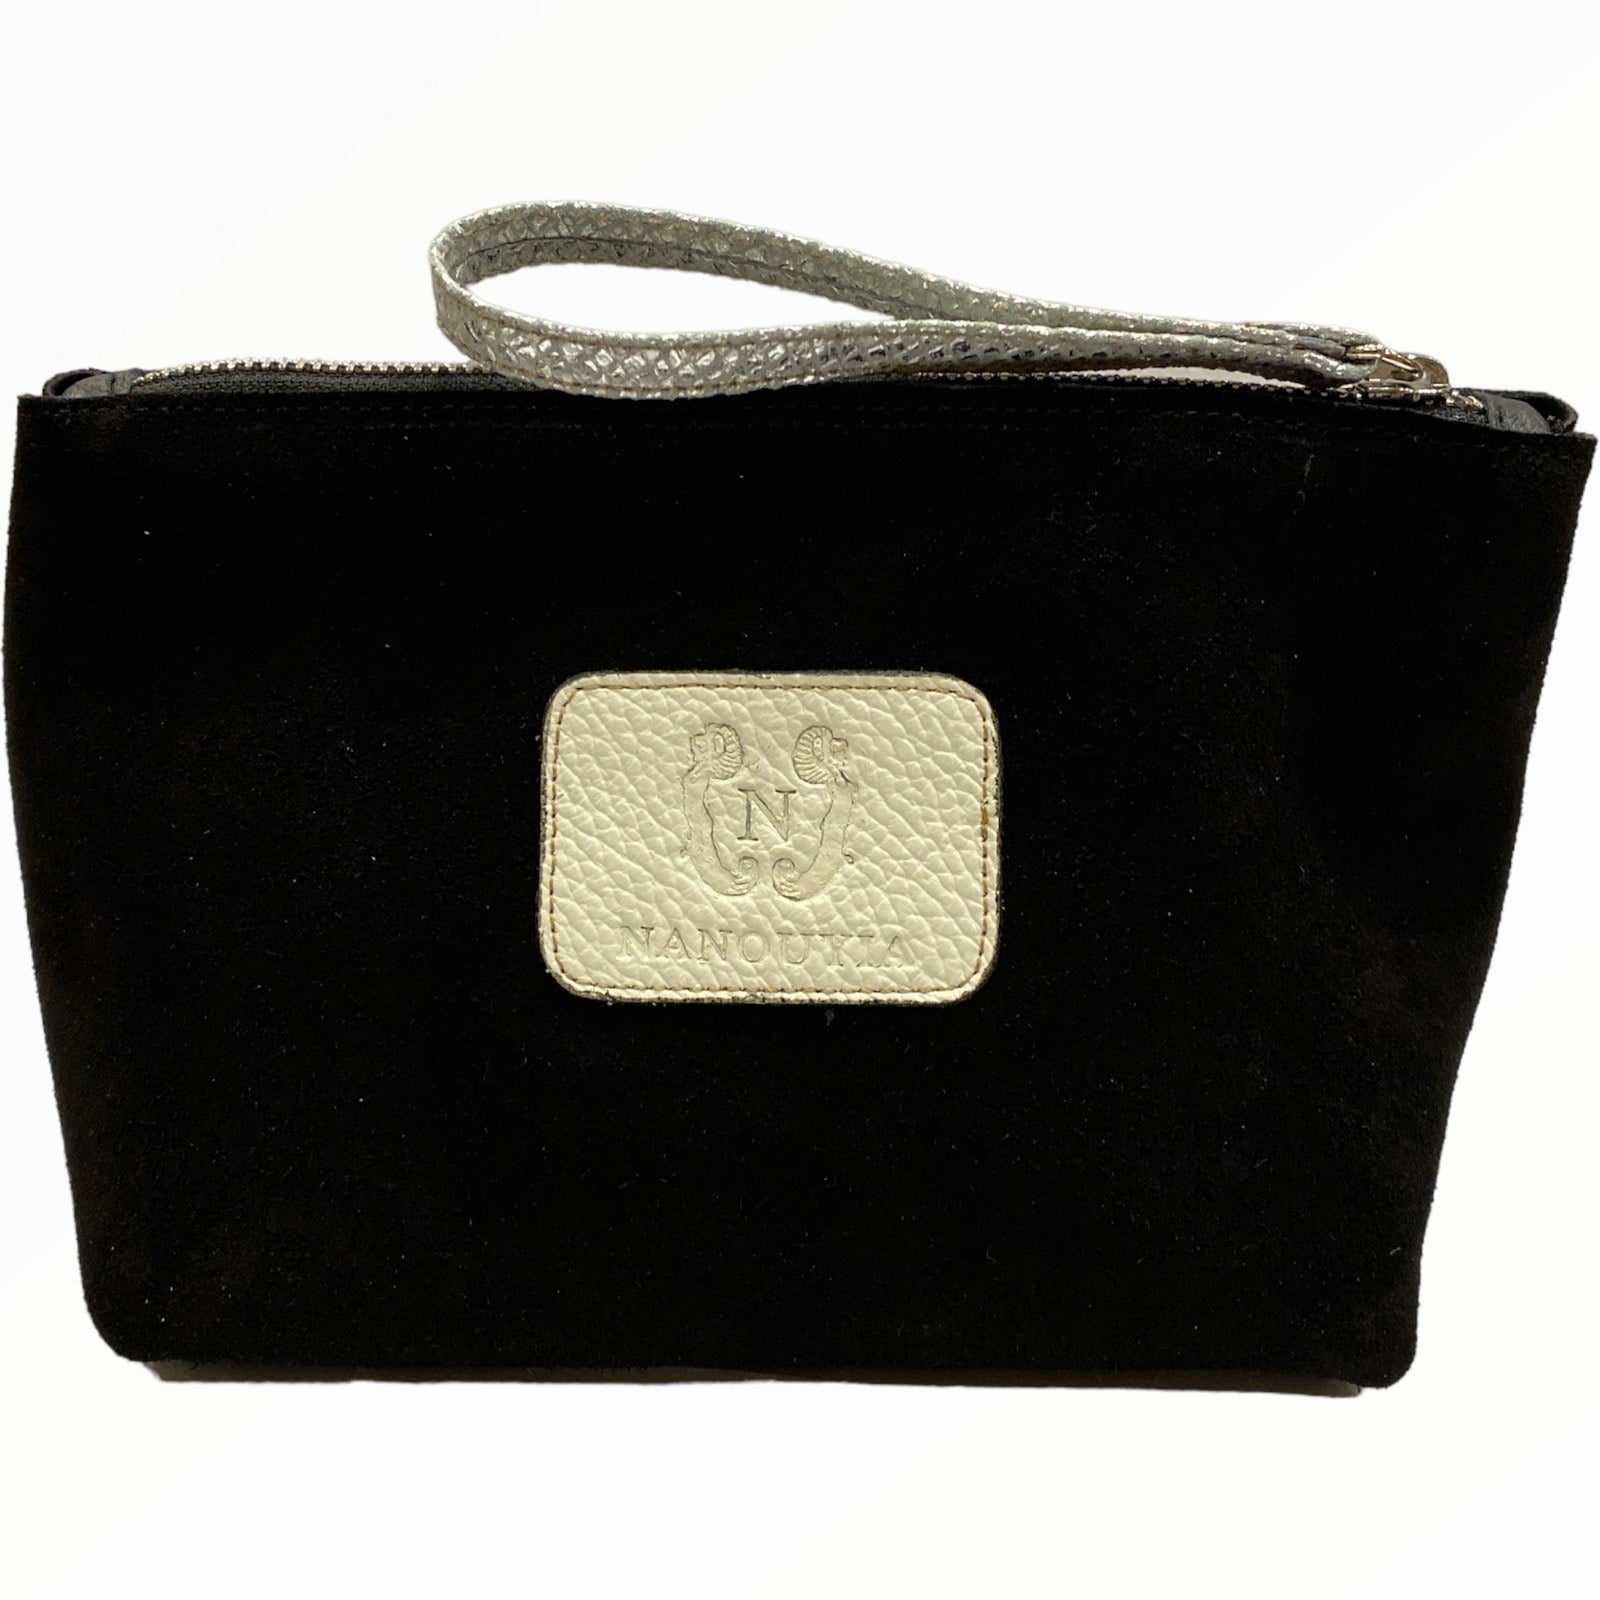 Black suede leather beauty case